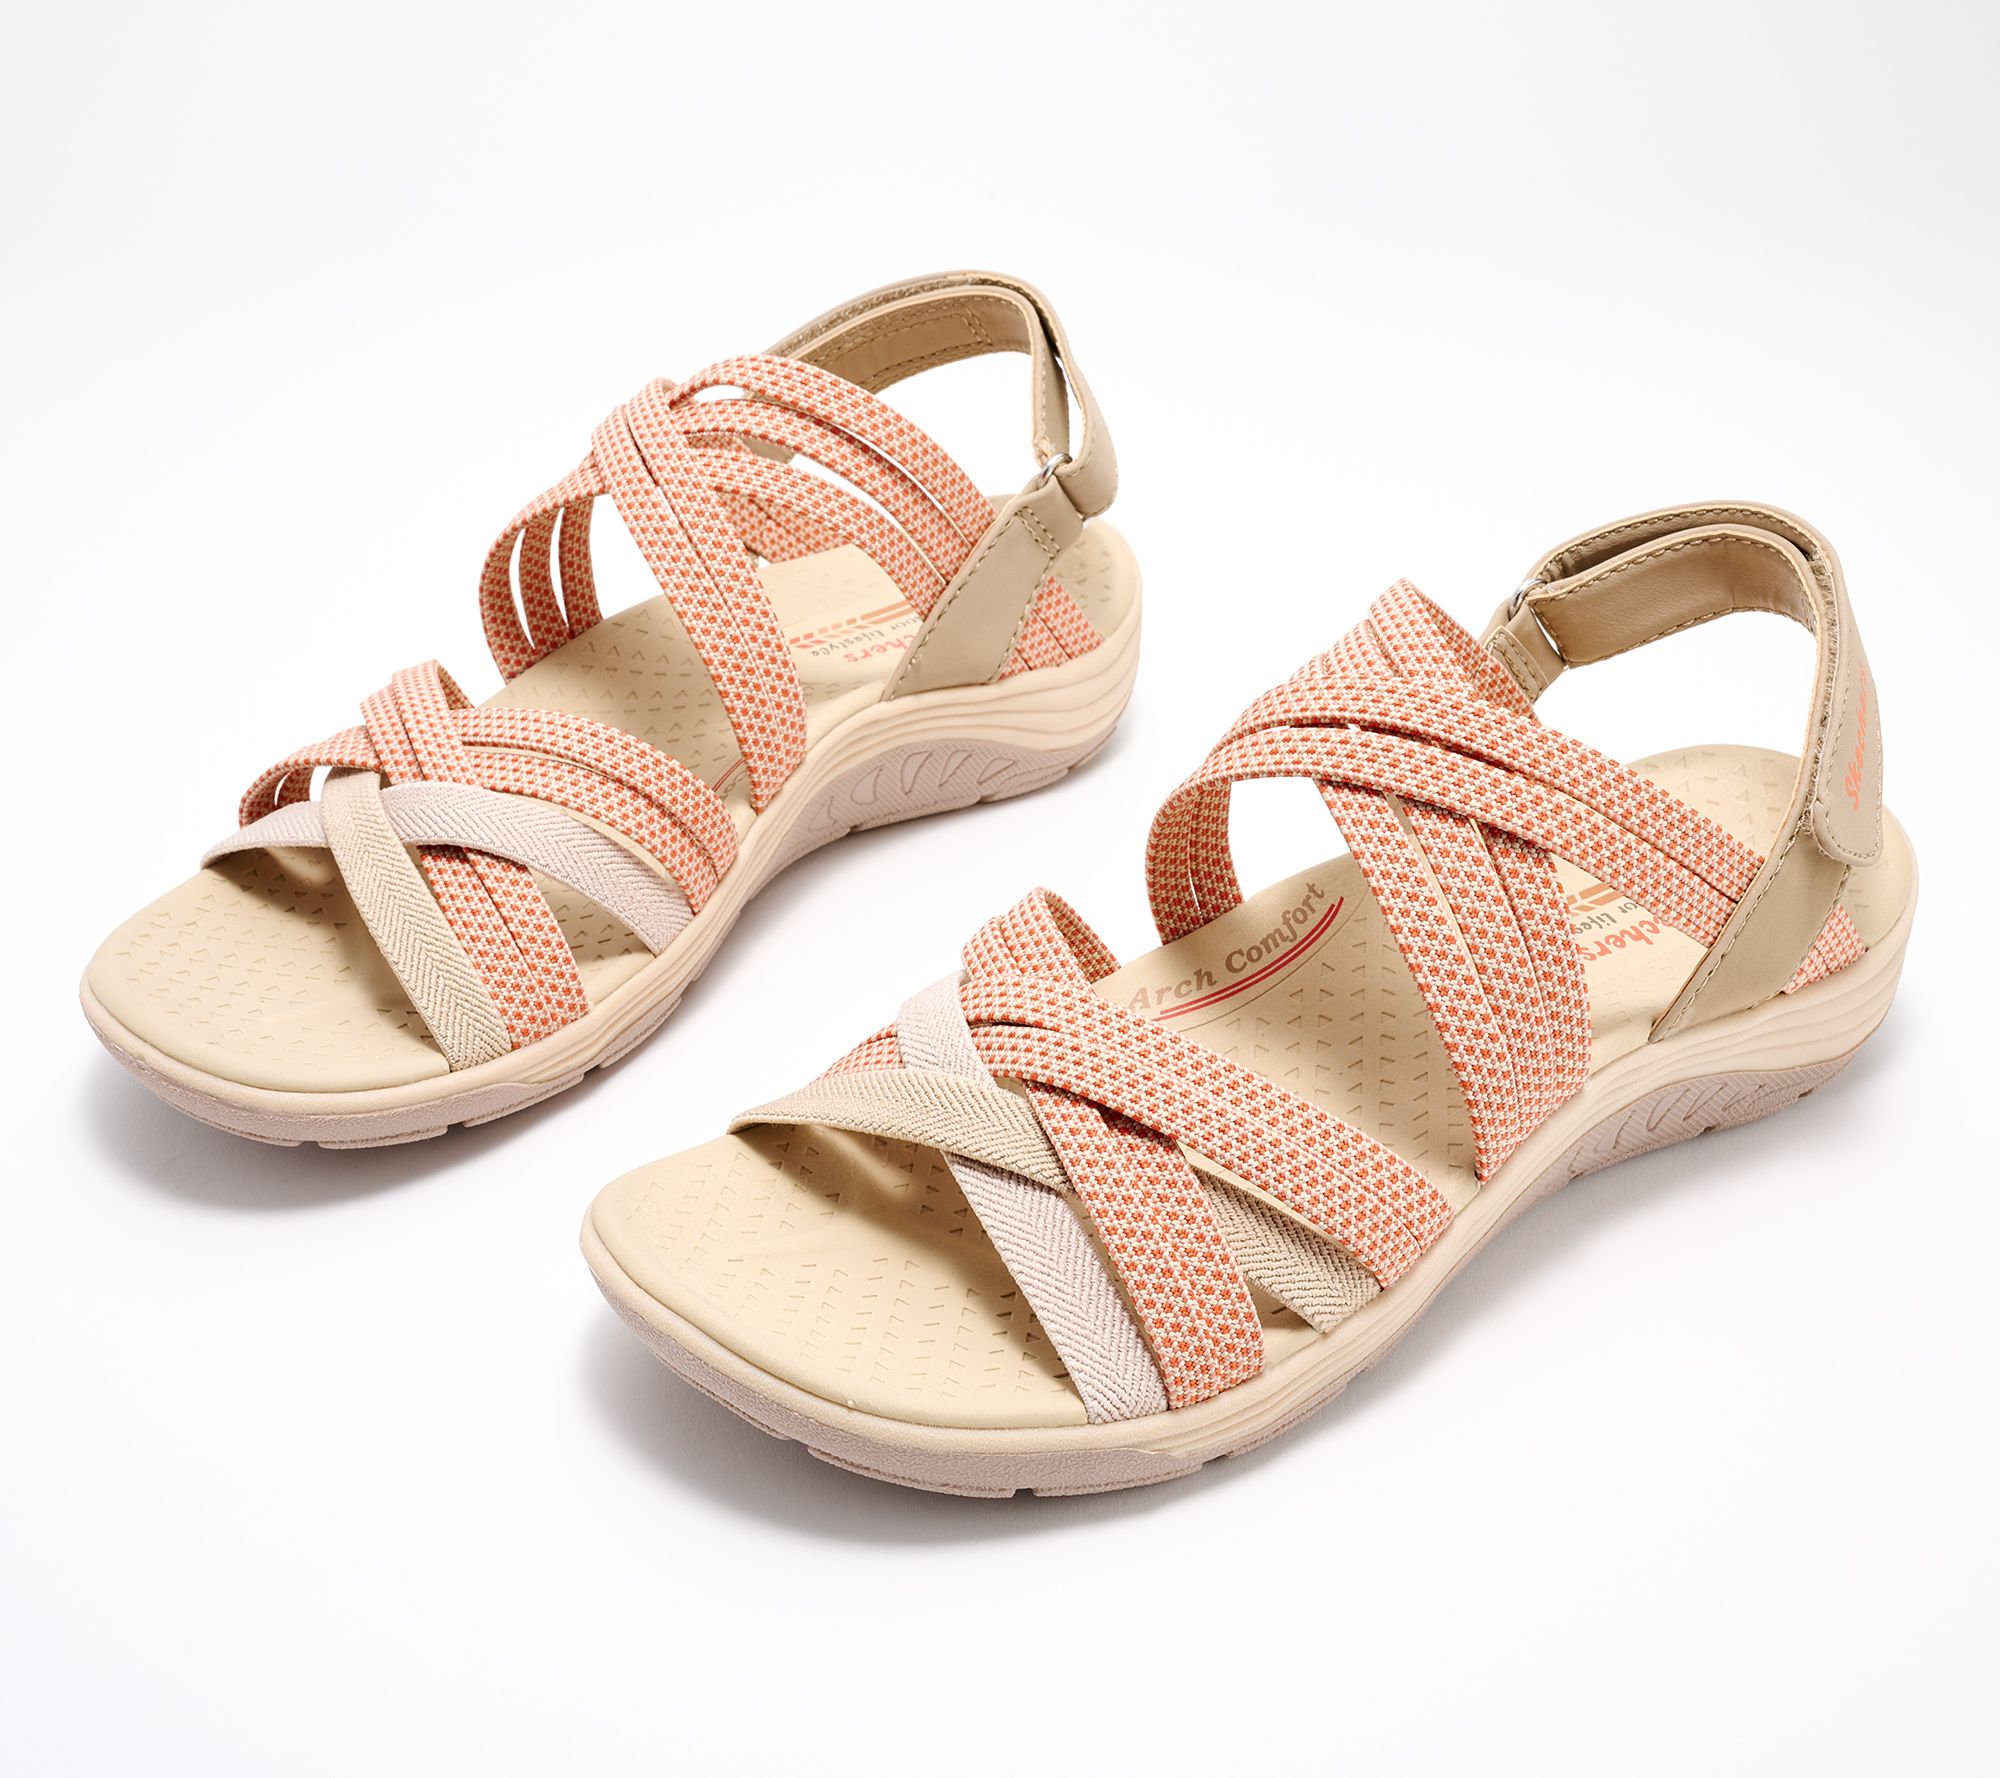 Skechers Washable Sport Sandals - Smitten By You - QVC.com